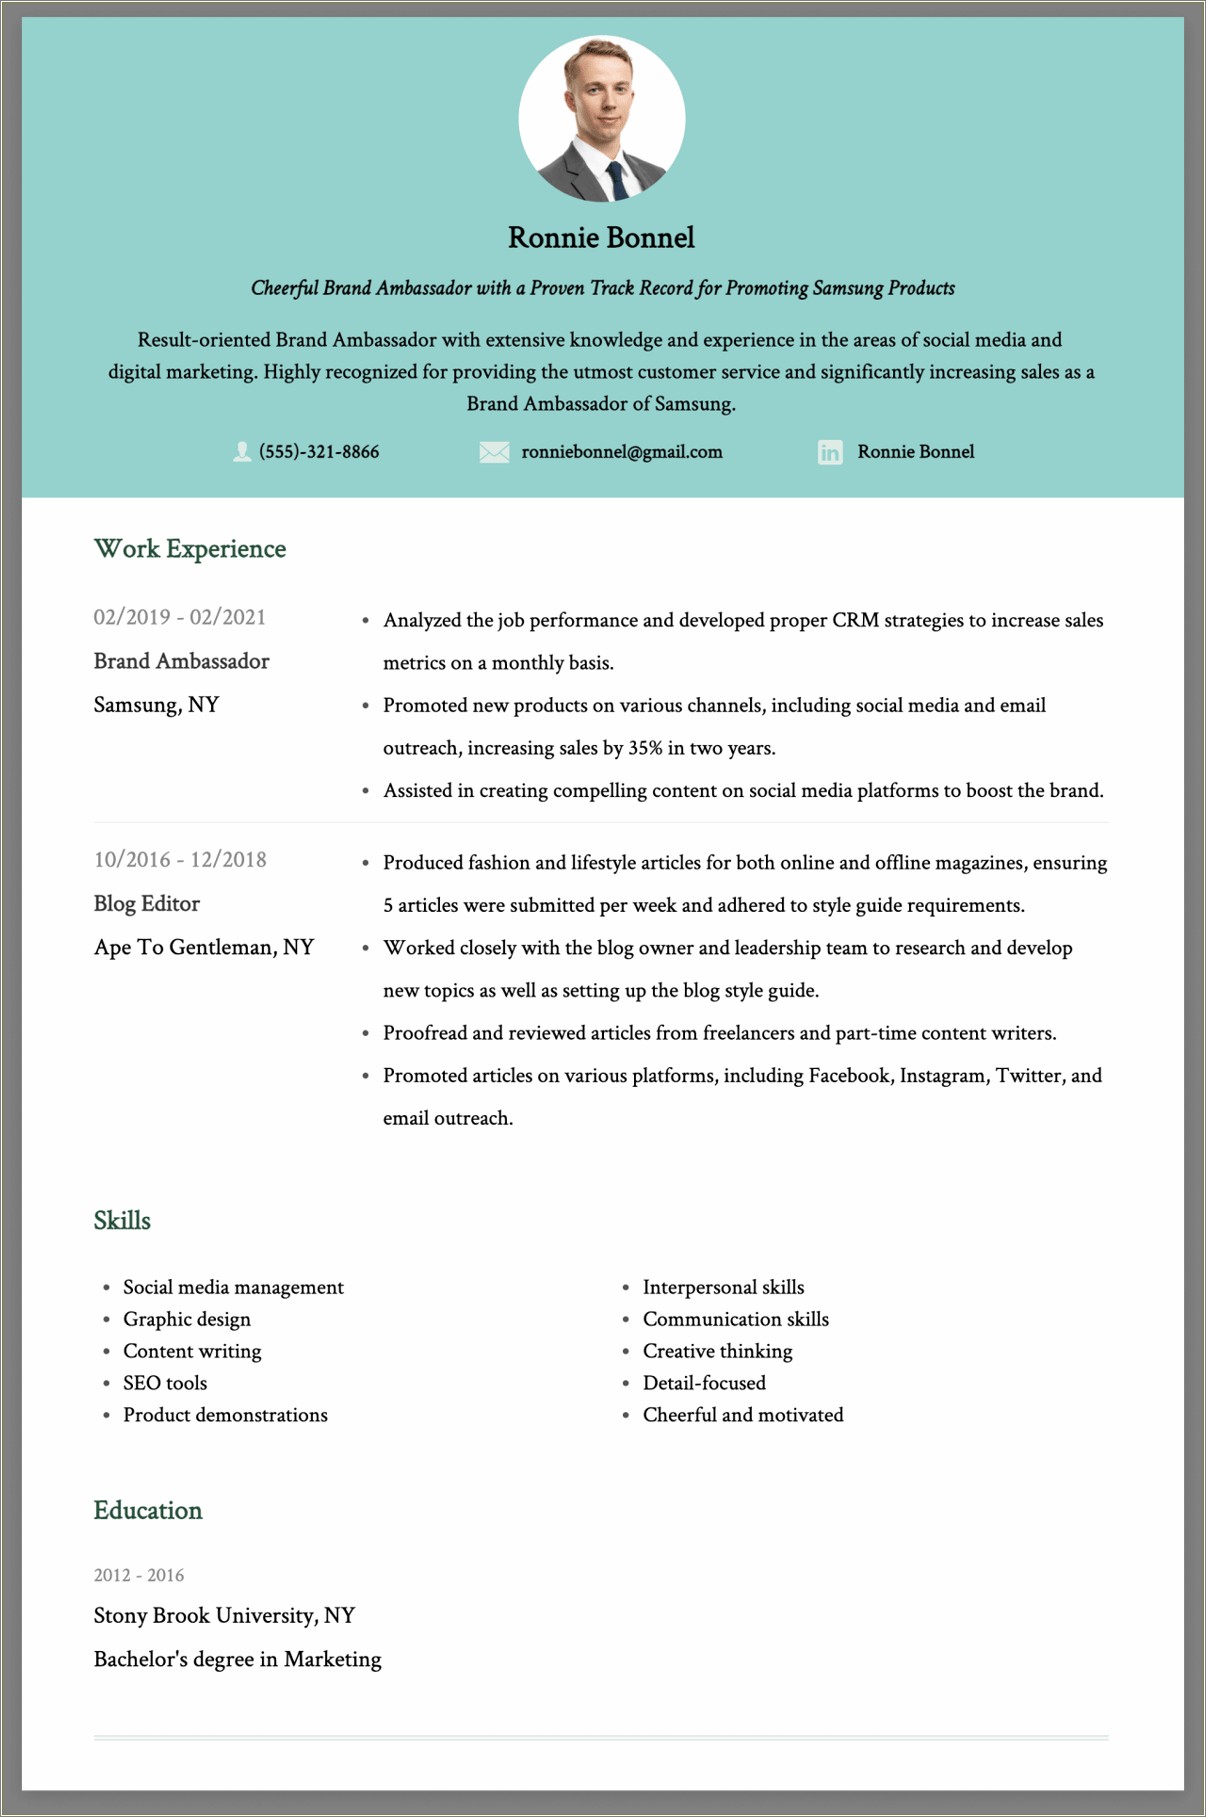 Sample Resume With Height And Weight